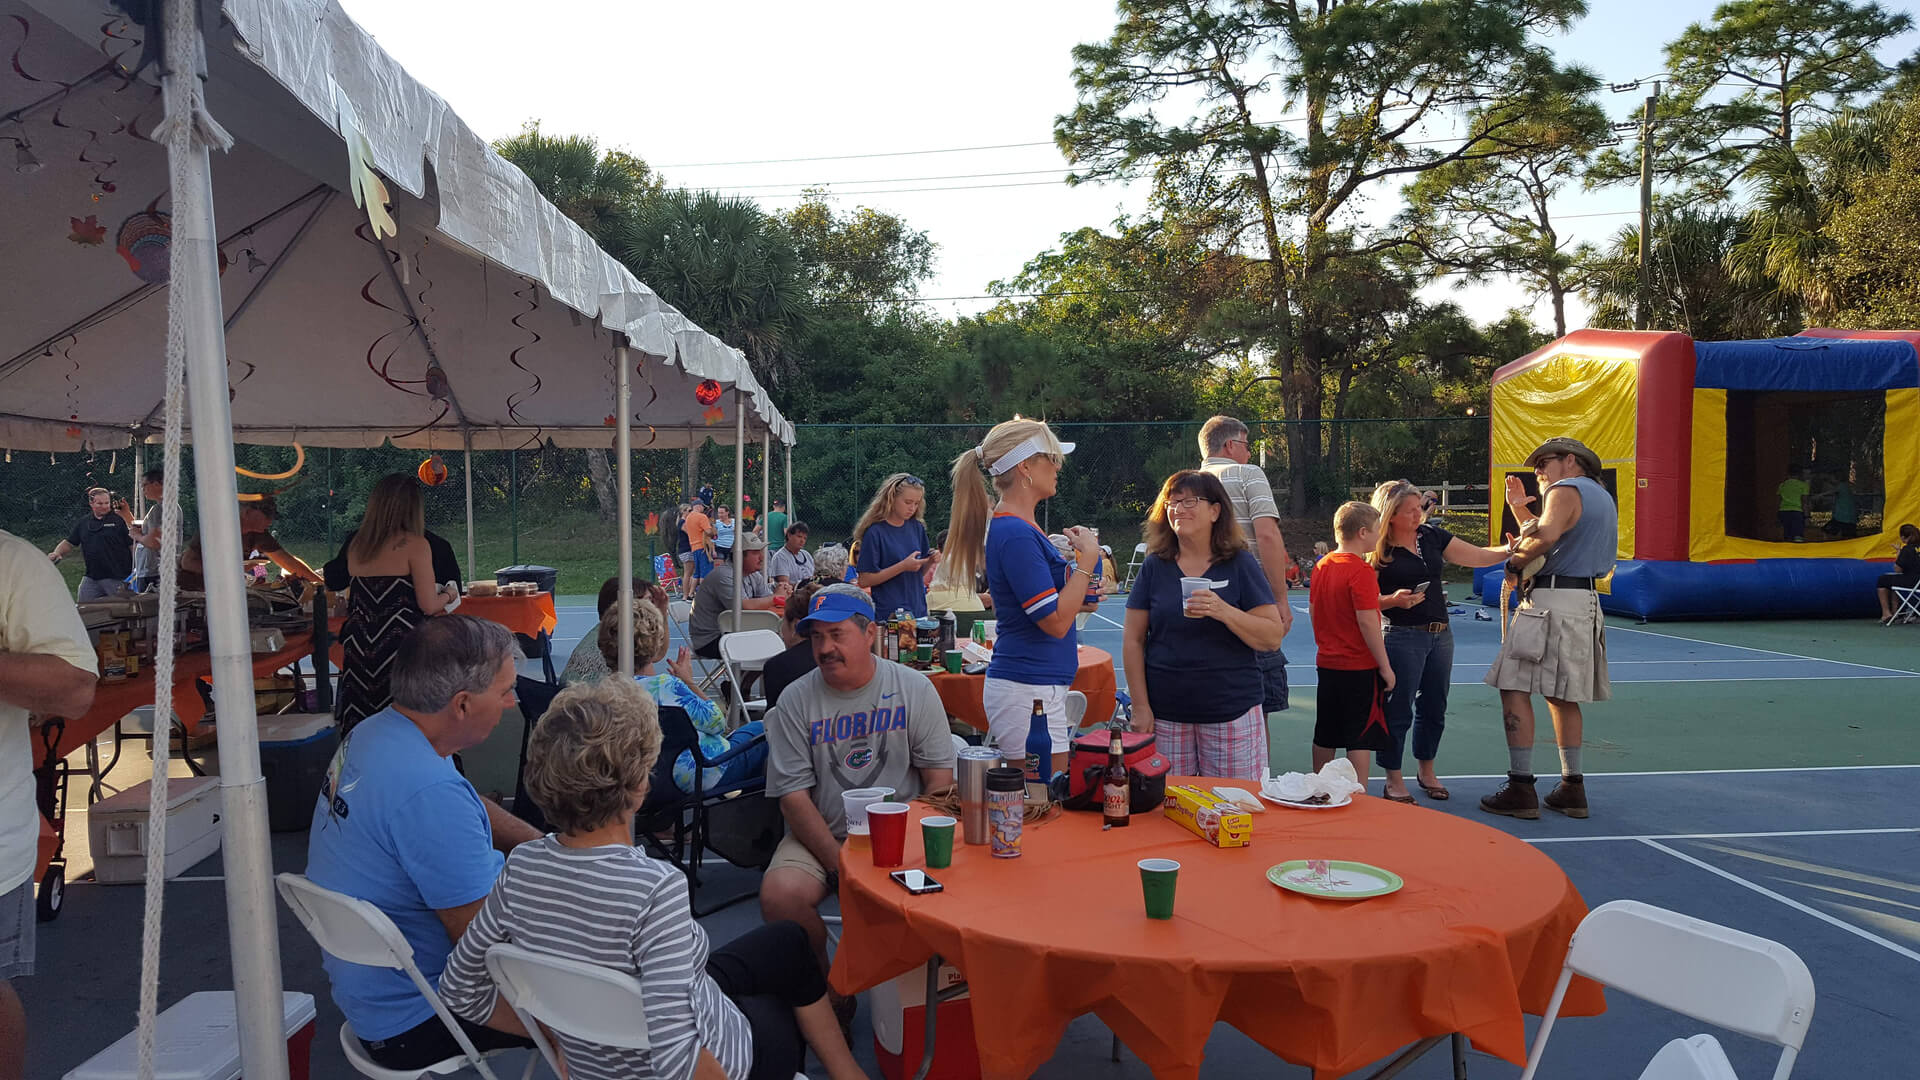 The picnic is a great time to grab a bite to eat and have some good banter with other residents from around the neighborhood.